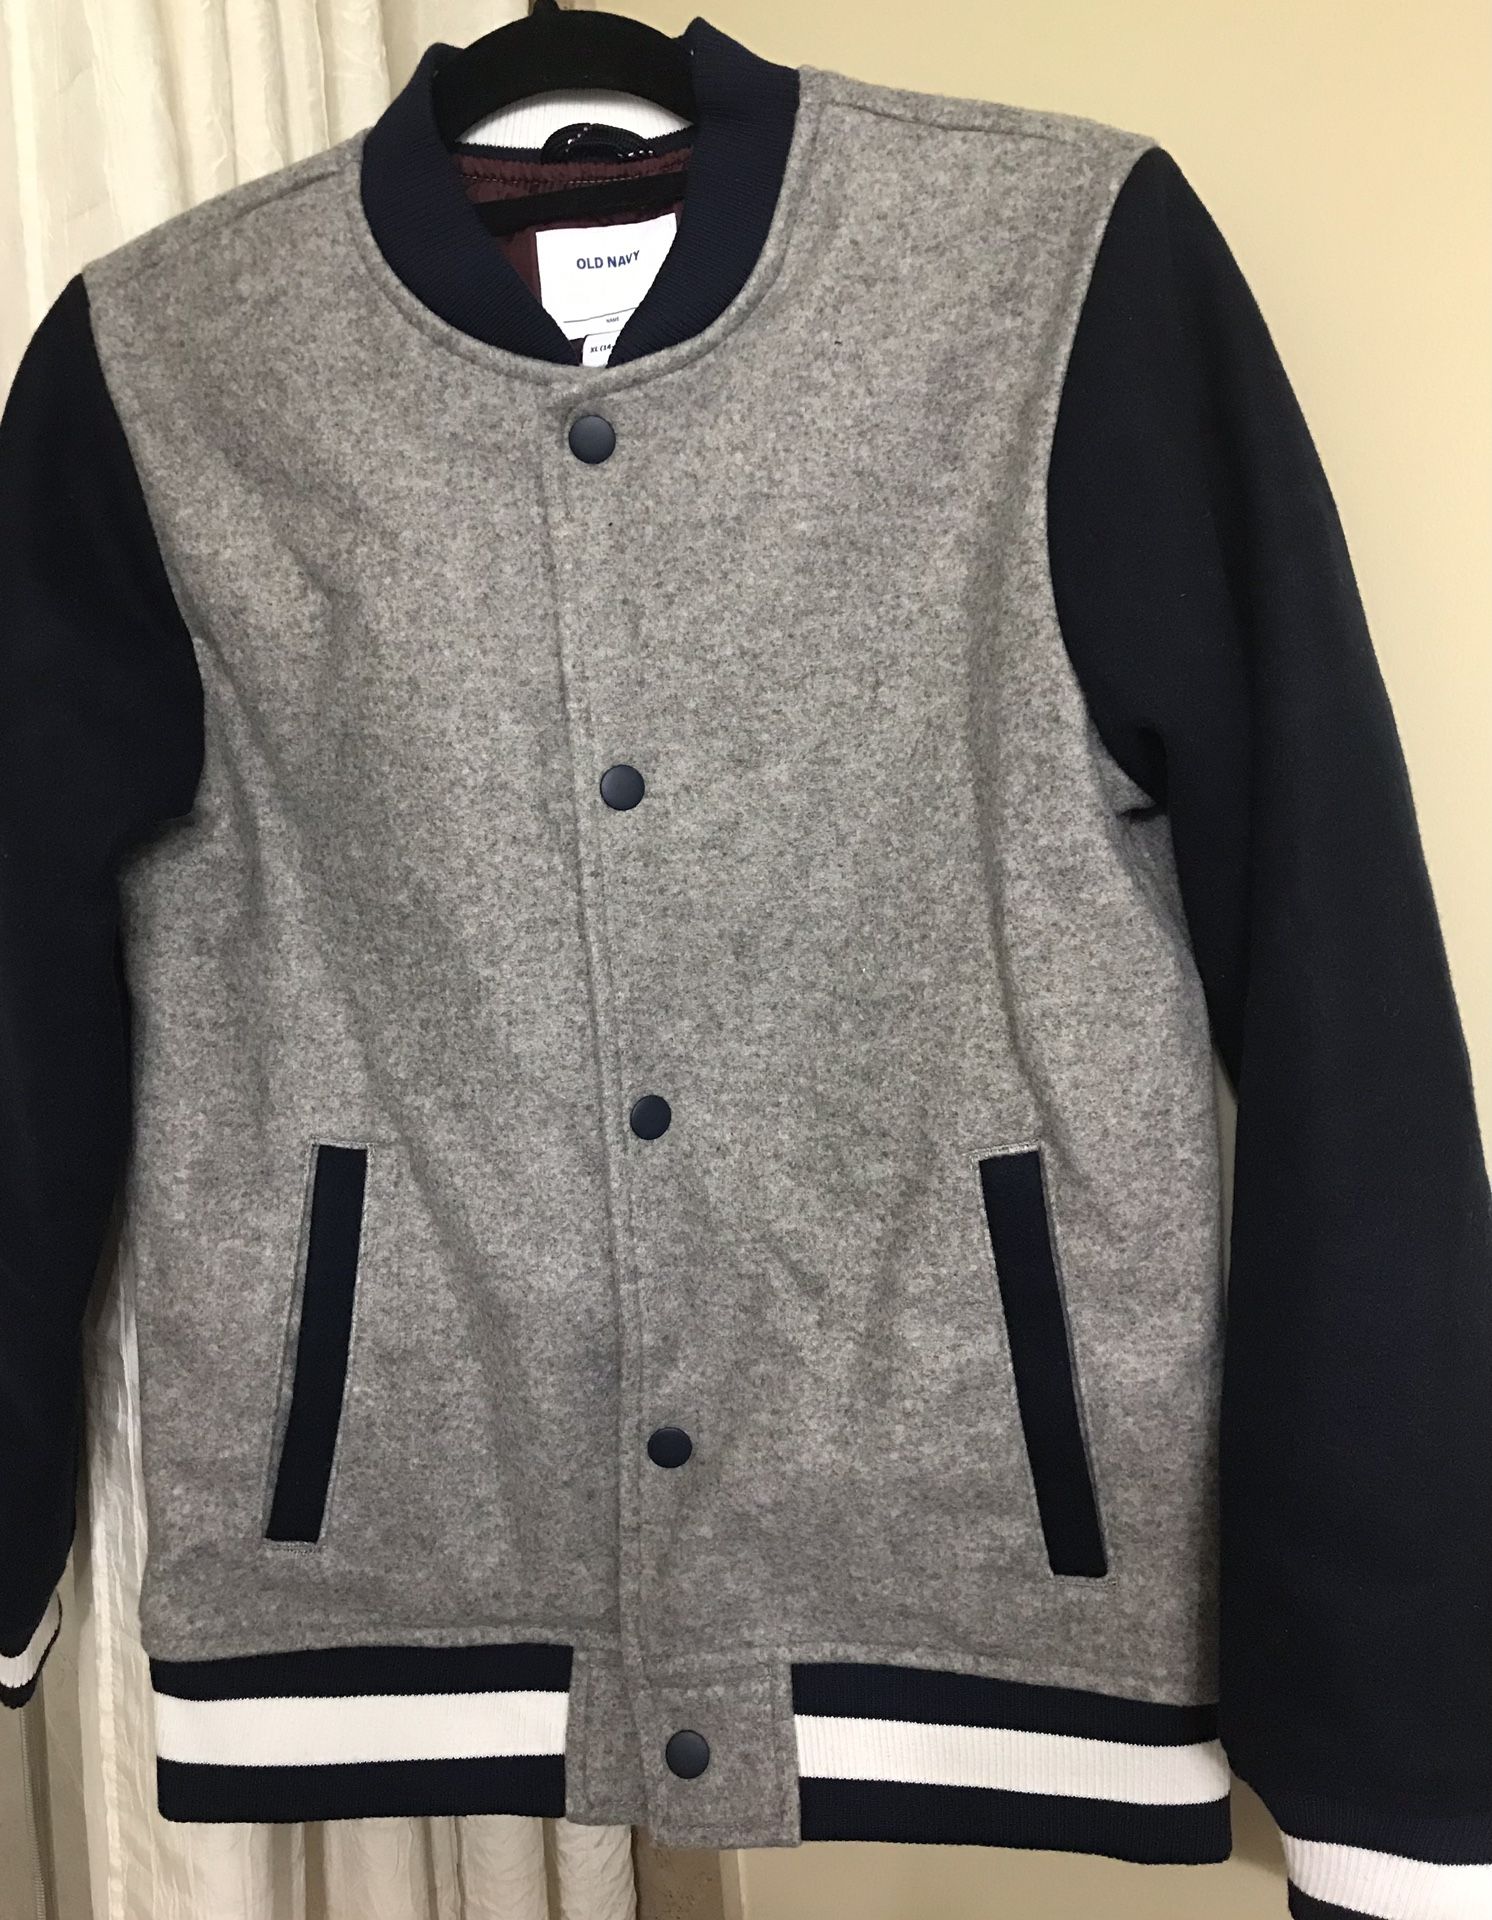 Boys jacket - New with tags